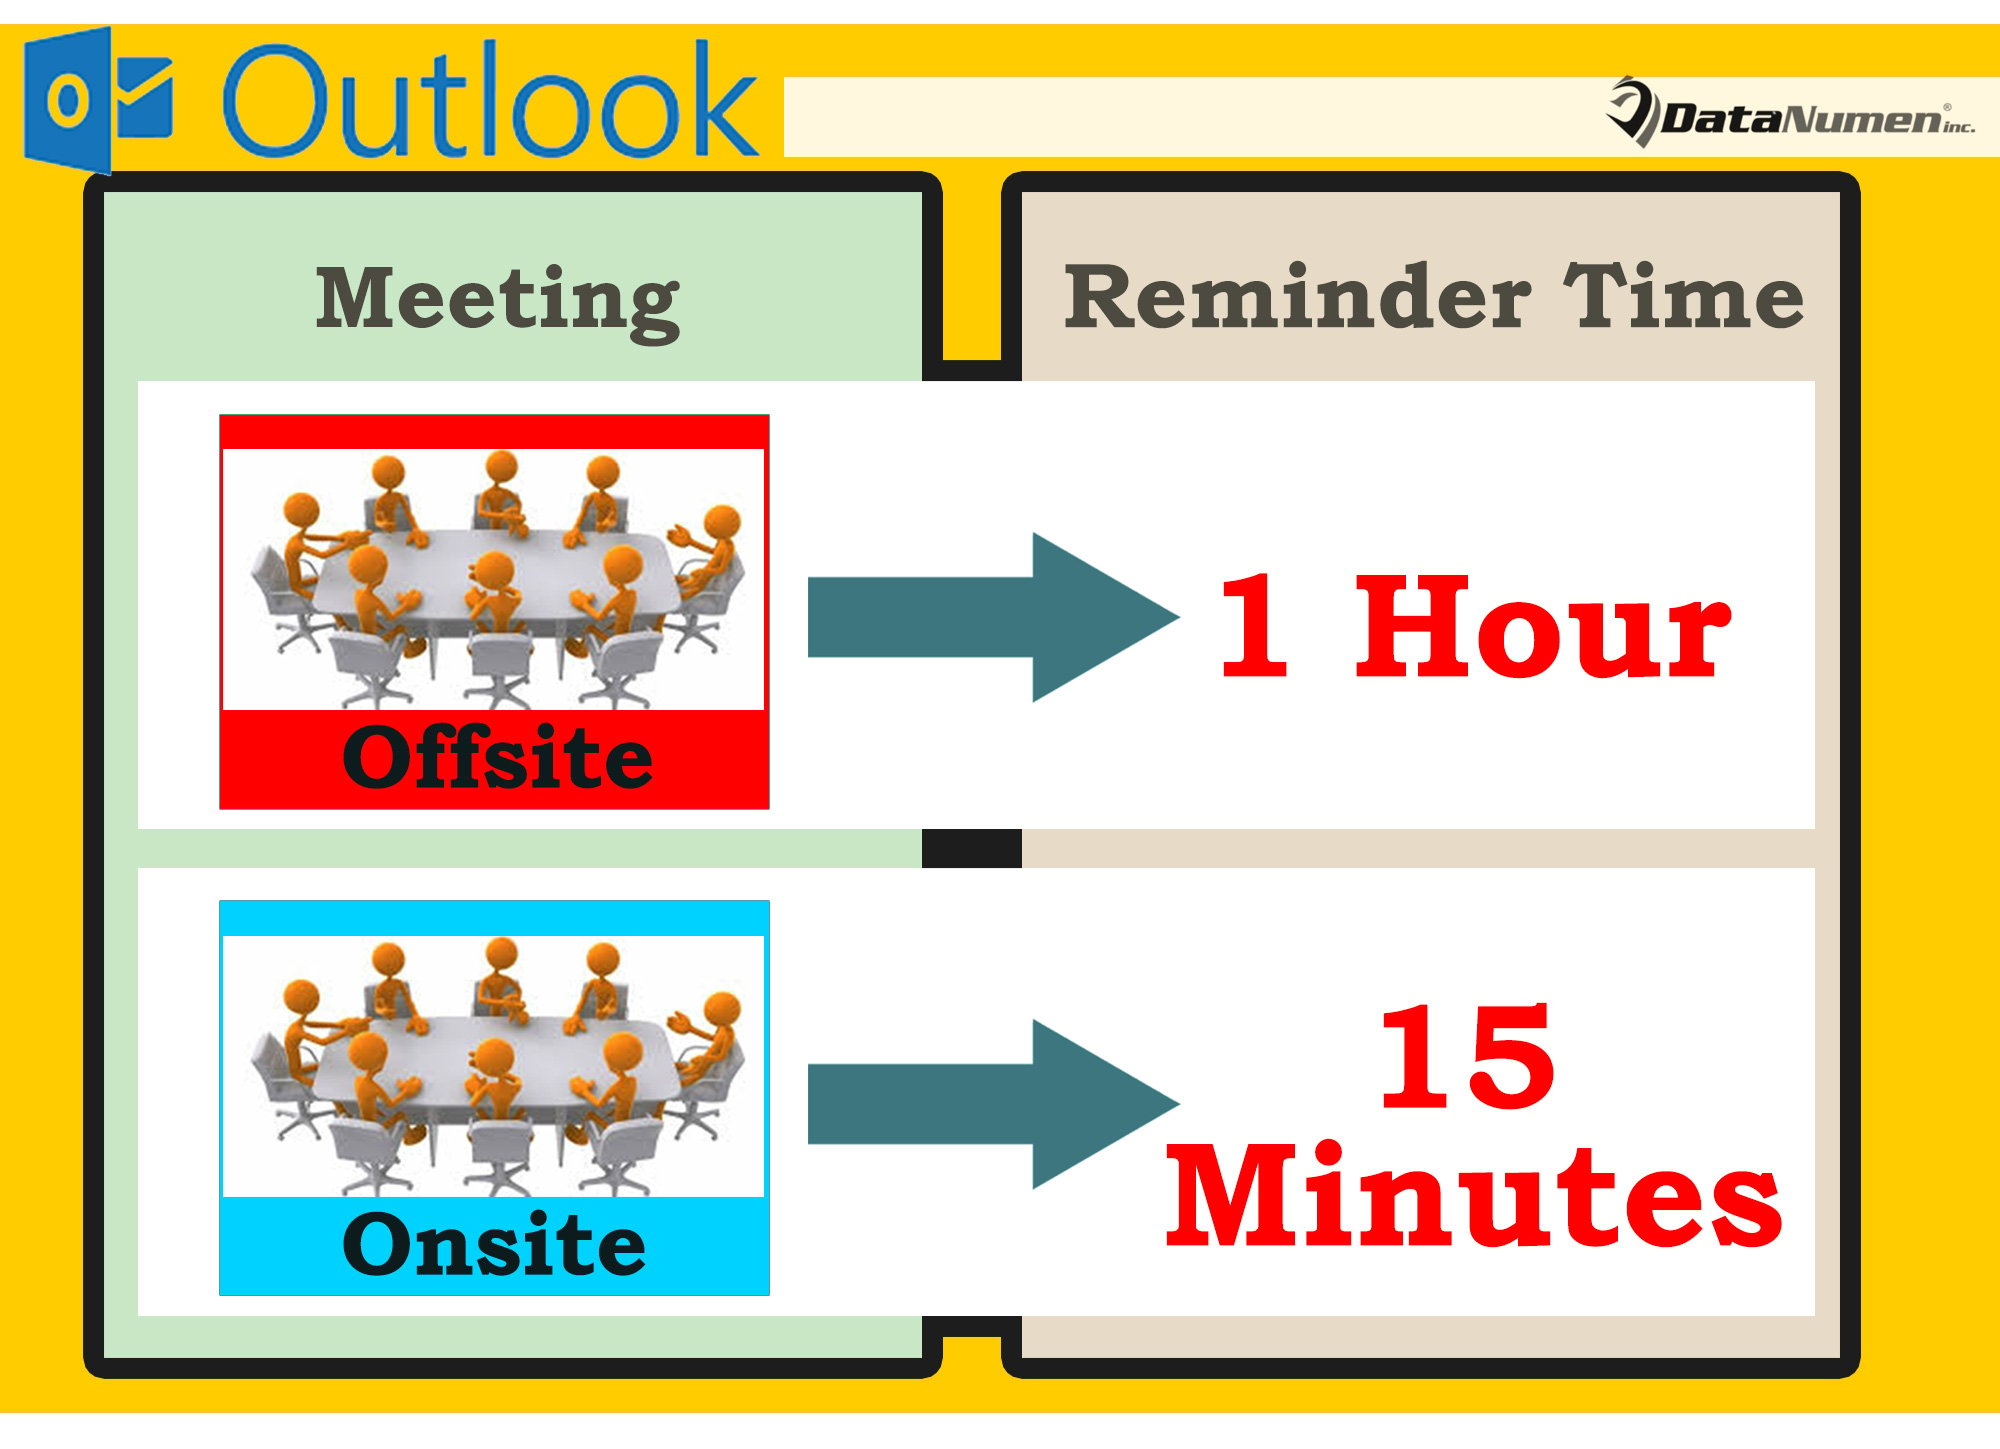 Auto Set Different Reminder Time for Outlook Meetings in Different Color Categories